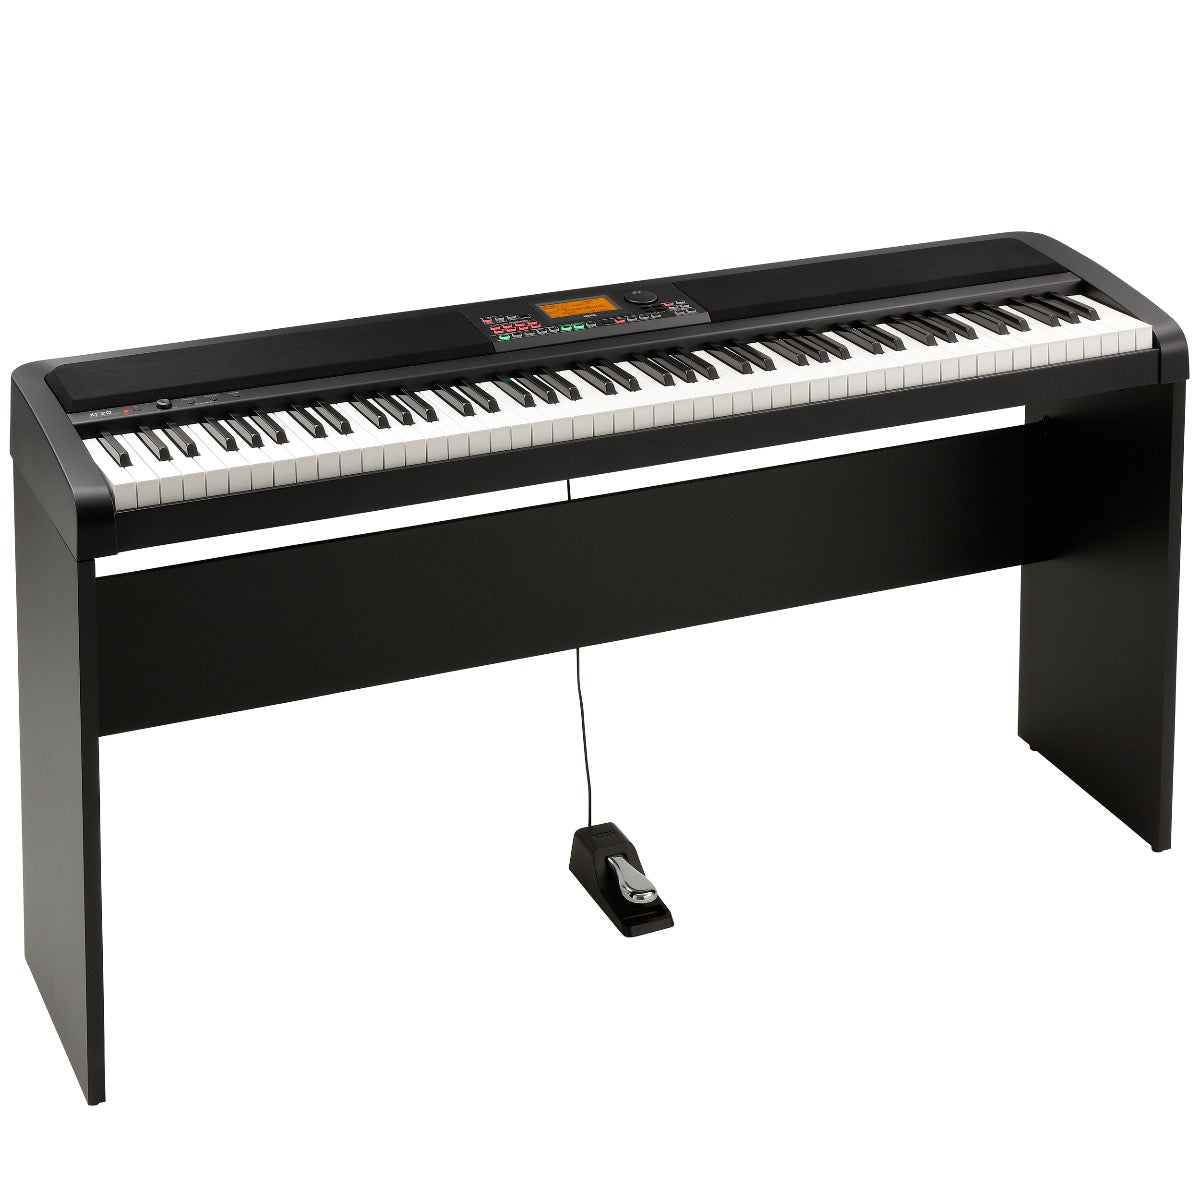 3/4 view showing top, front and left side of Korg XE20 Home Digital Ensemble Piano with stand and sustain pedal